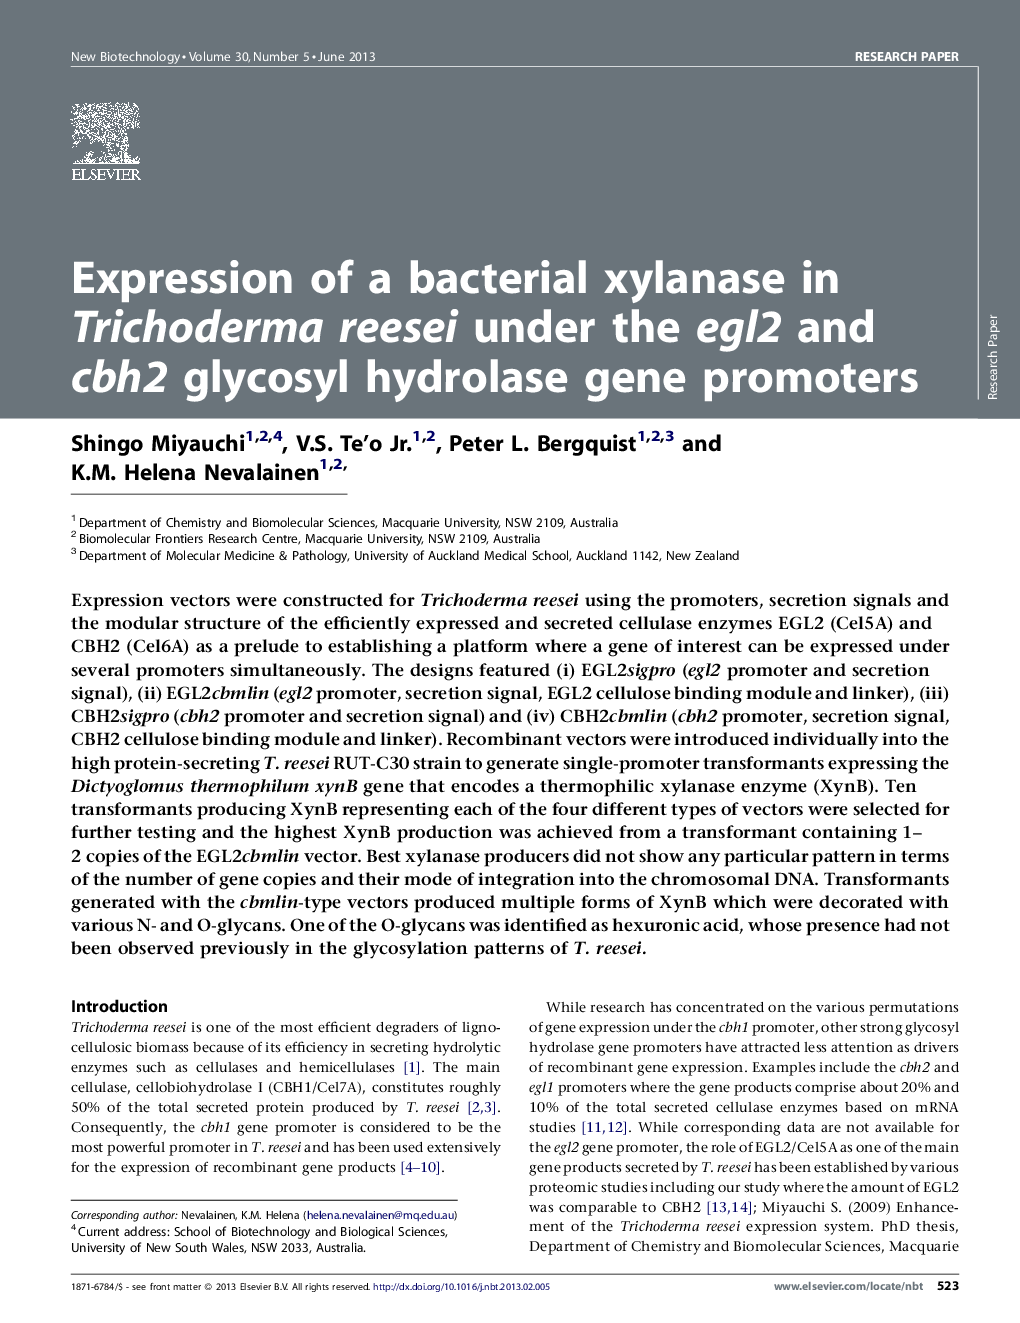 Expression of a bacterial xylanase in Trichoderma reesei under the egl2 and cbh2 glycosyl hydrolase gene promoters